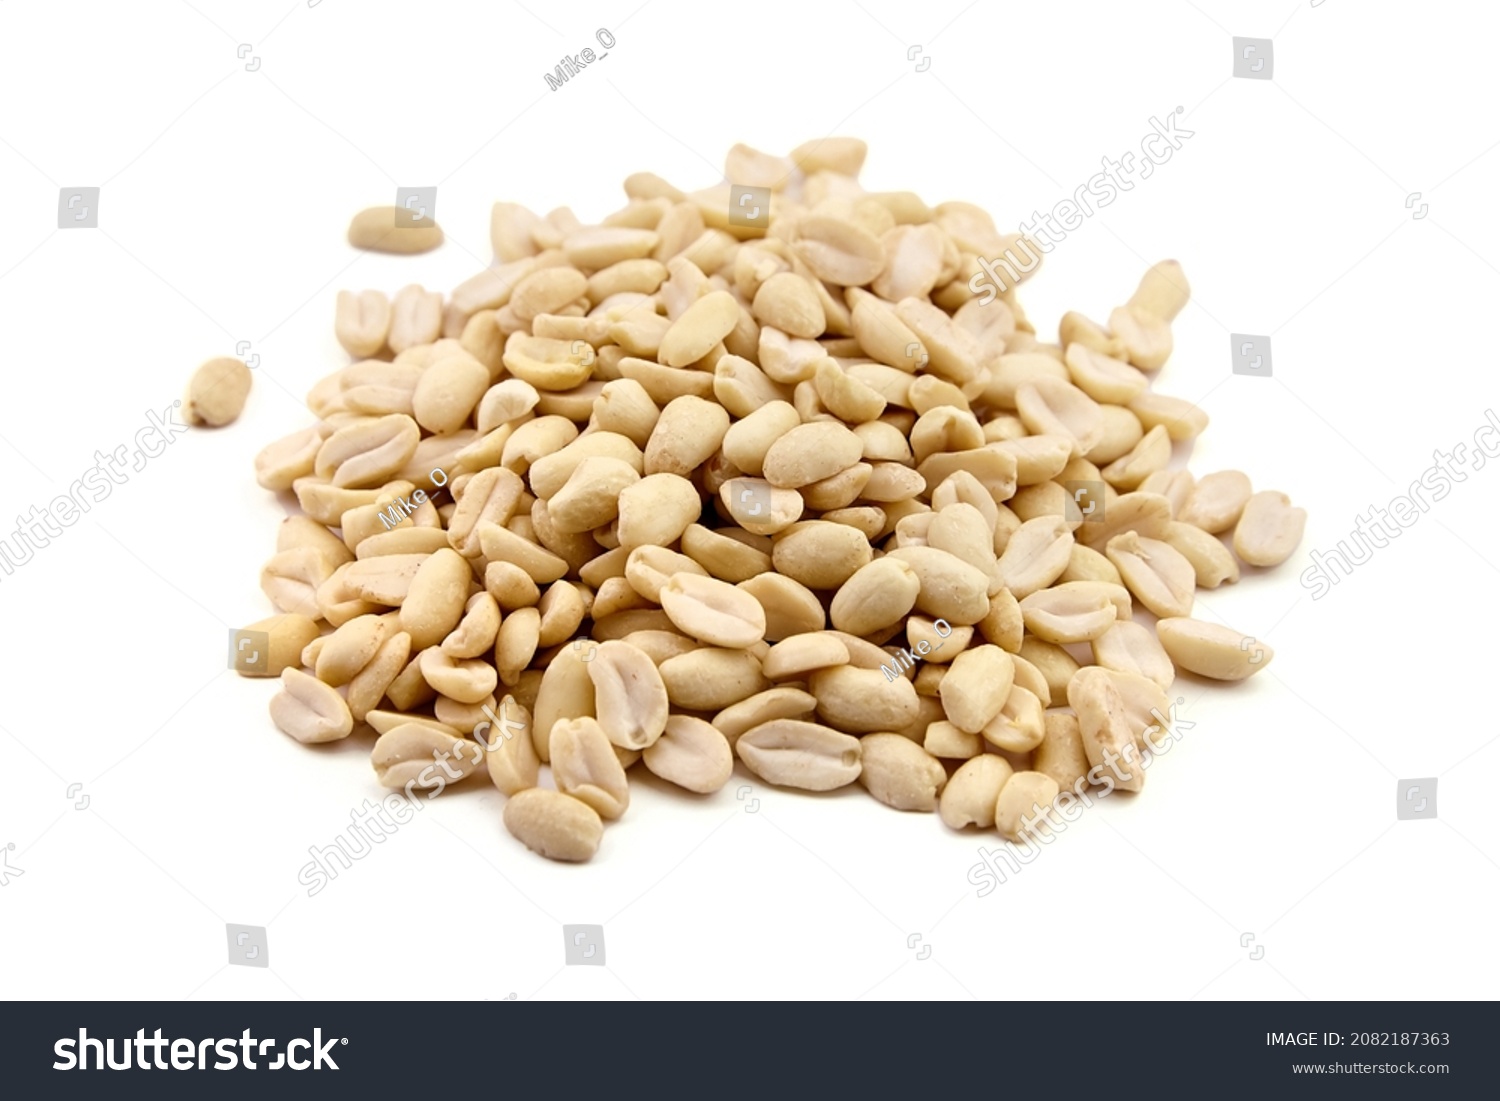 Raw blanched peanuts isolated on white background #2082187363